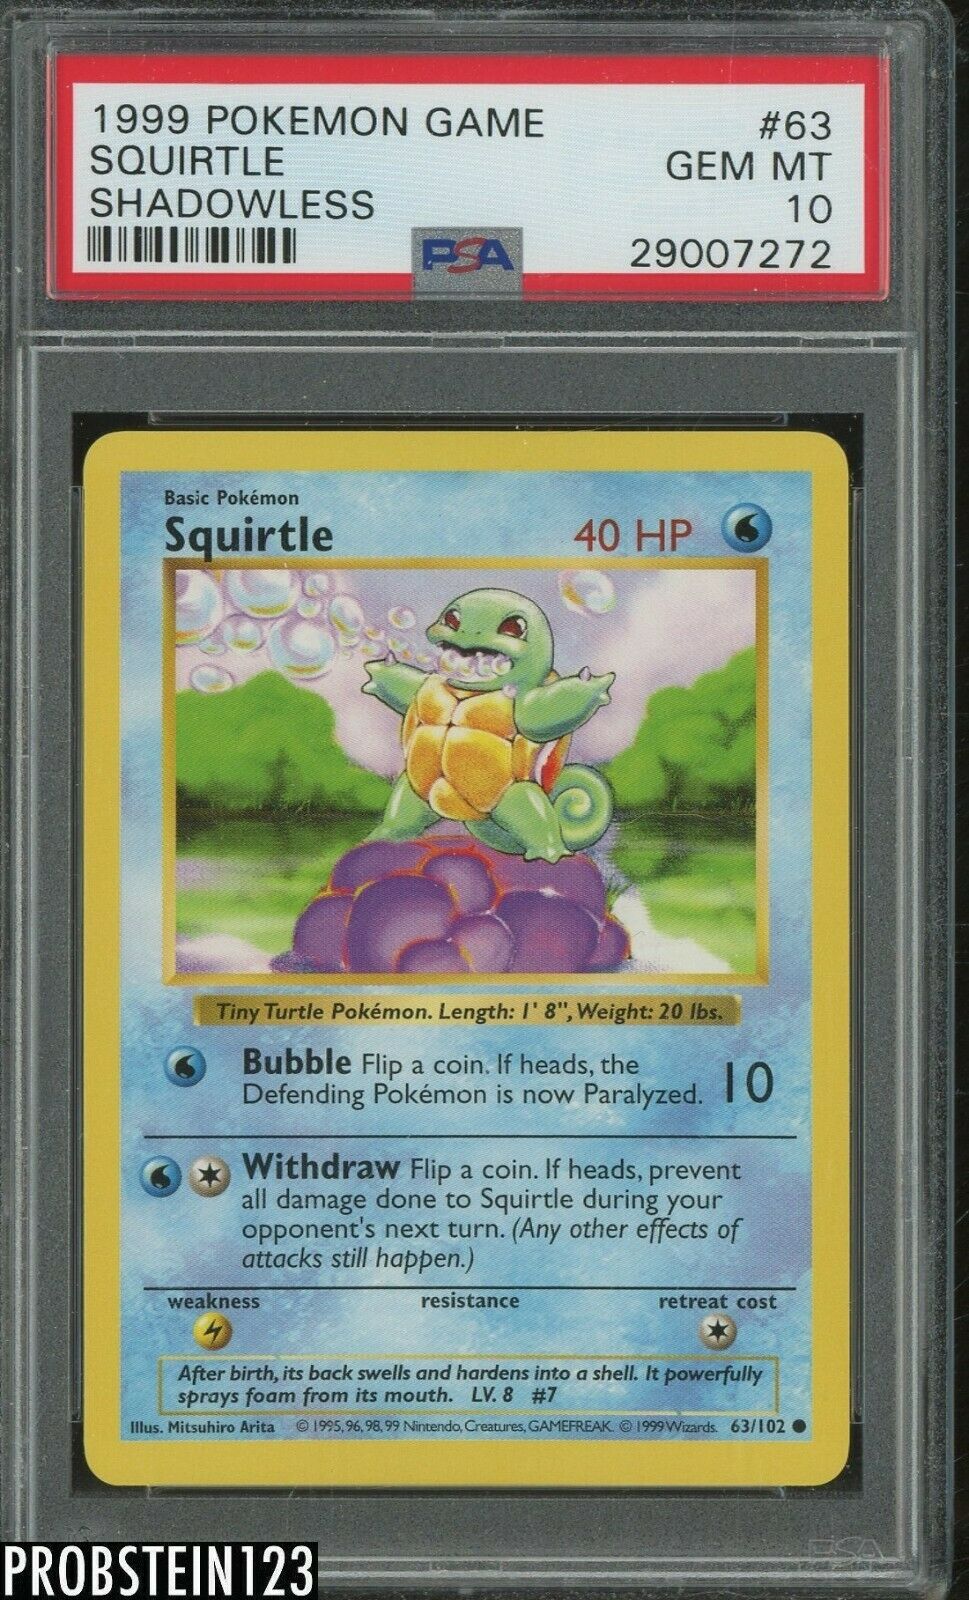 1999 Pokemon Game Shadowless 63 Squirtle PSA 10 GEM MINT